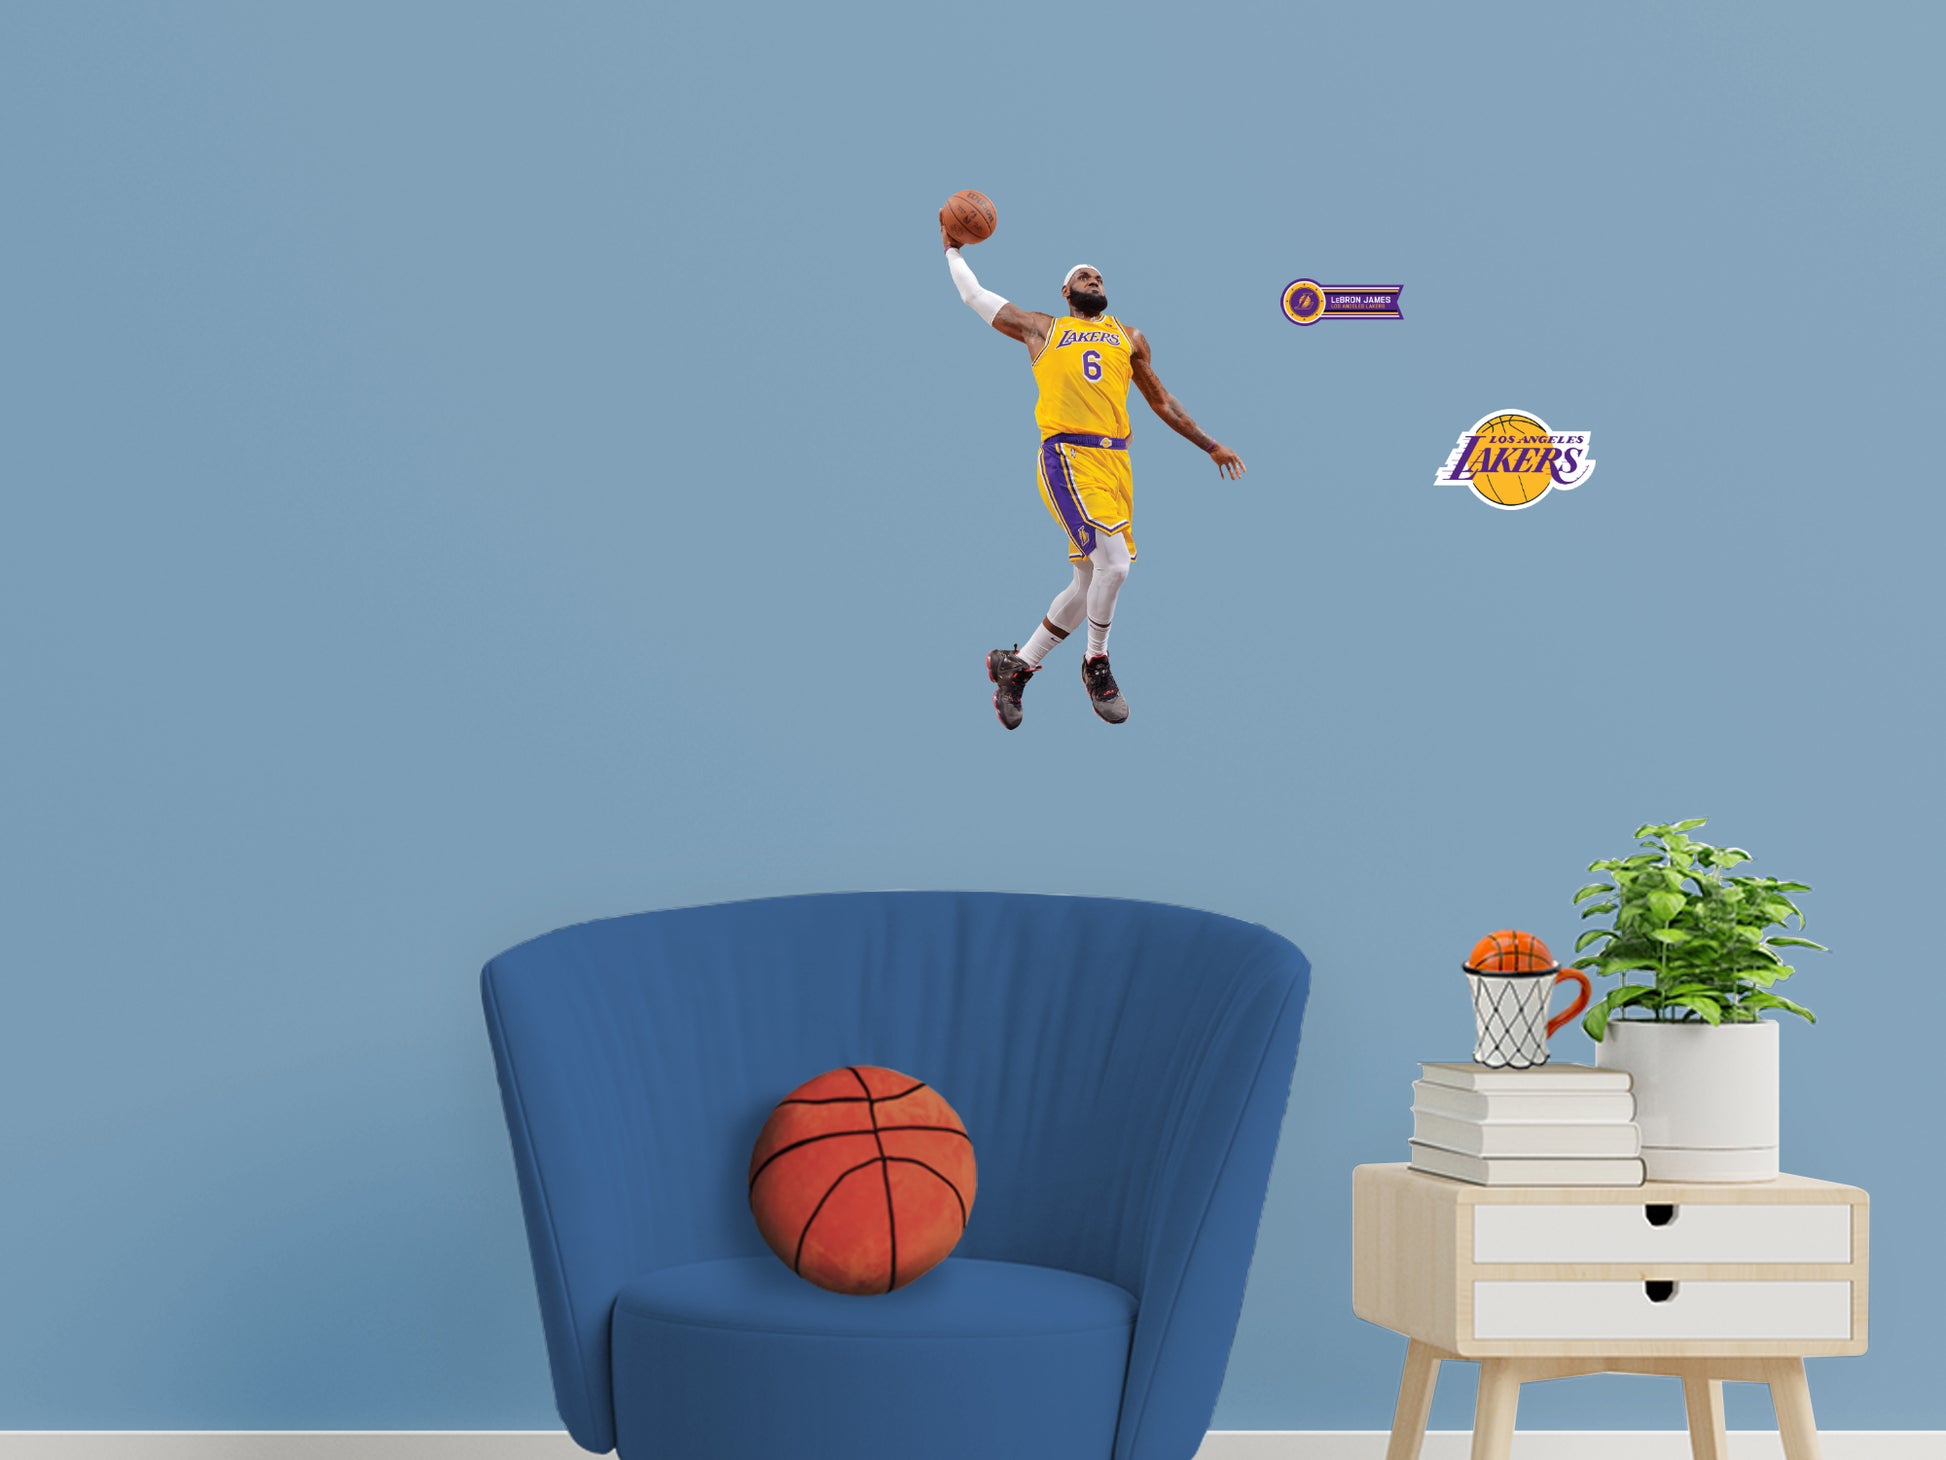 Fathead NBA Los Angeles Lakers LeBron James LeBron James- Officially Licensed Removable Wall Decal